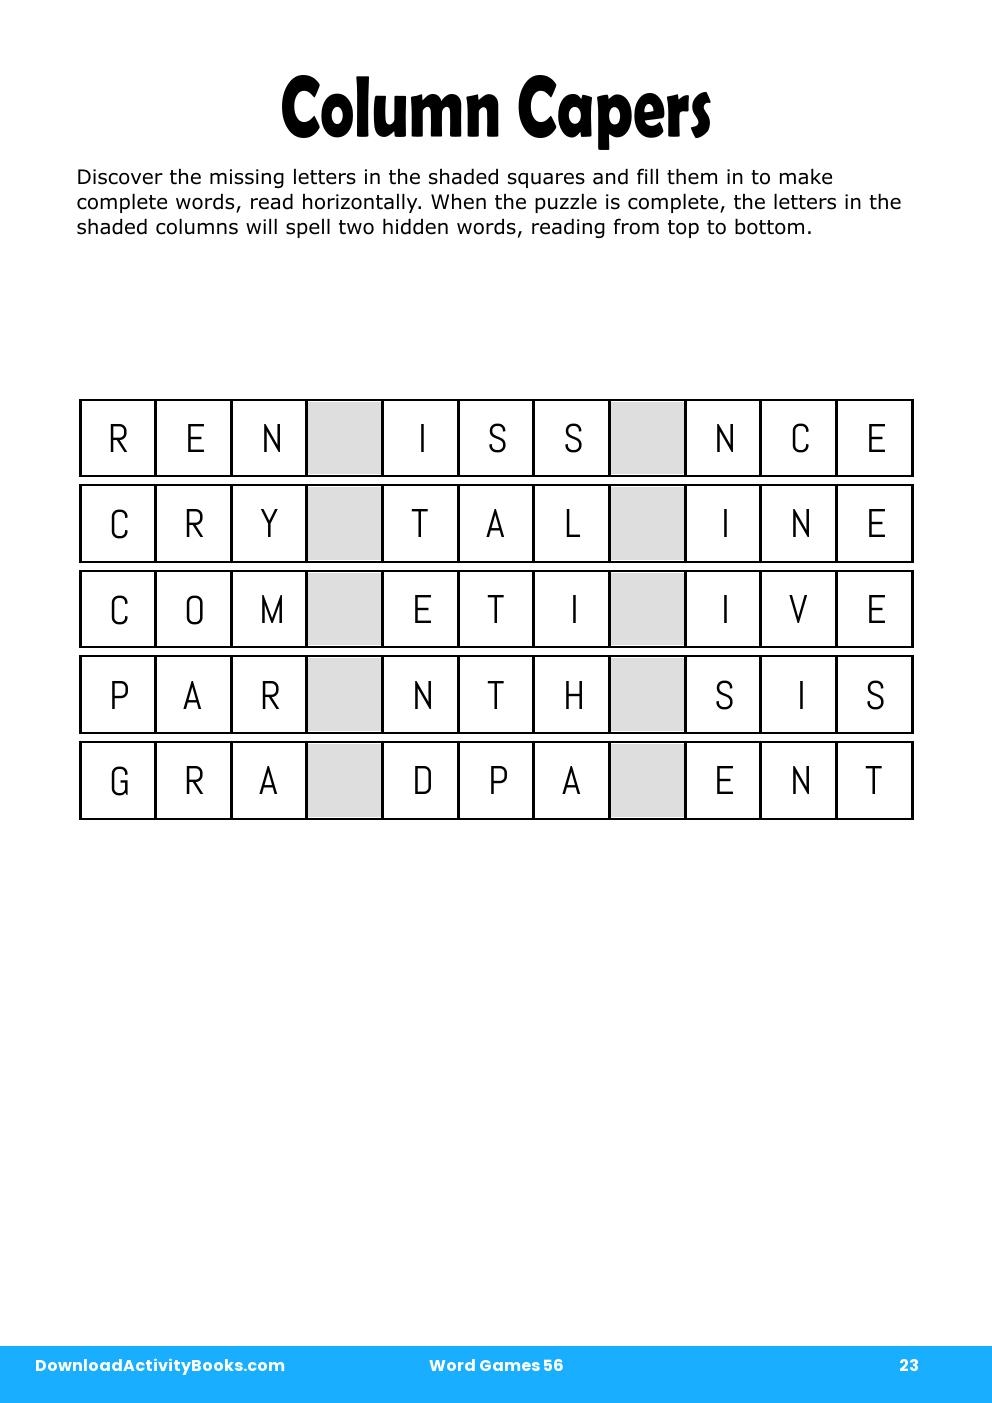 Column Capers in Word Games 56